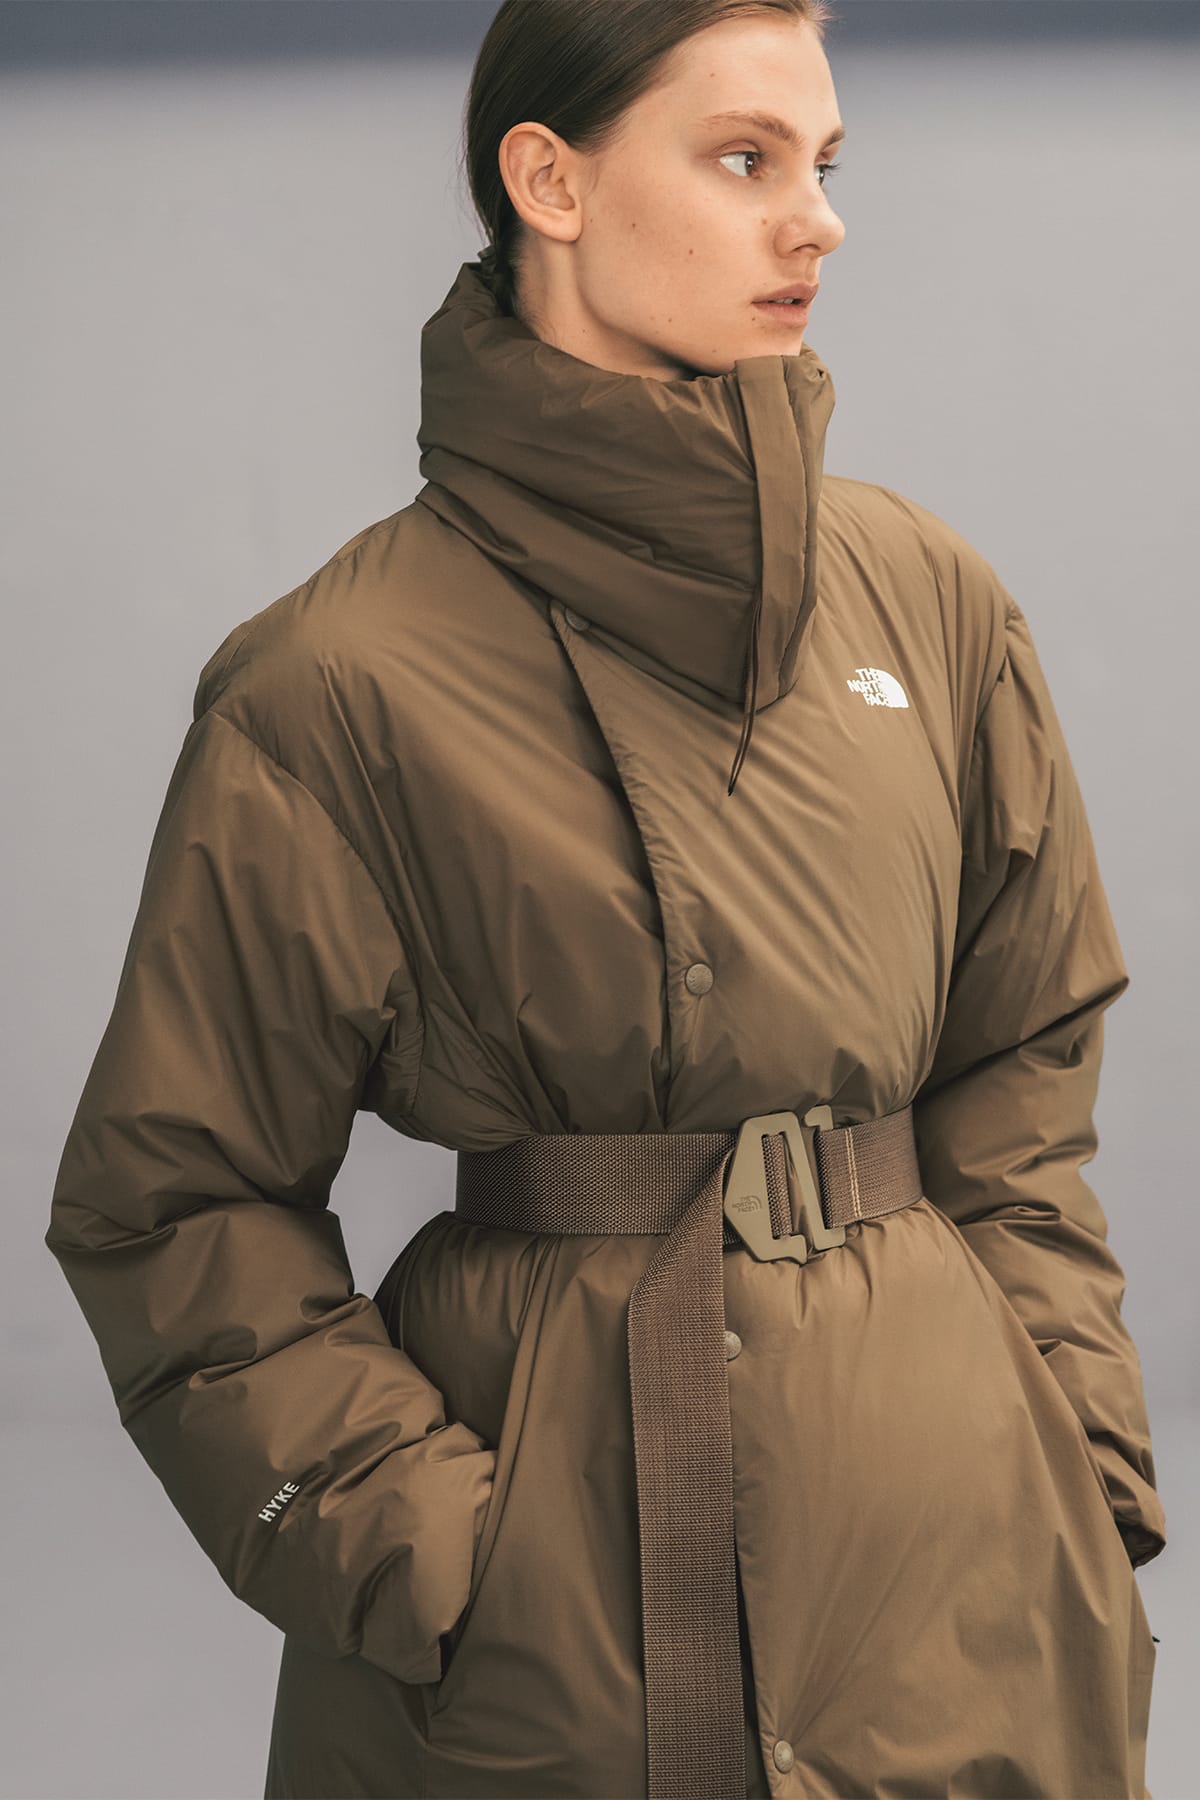 north face women's jackets 2018